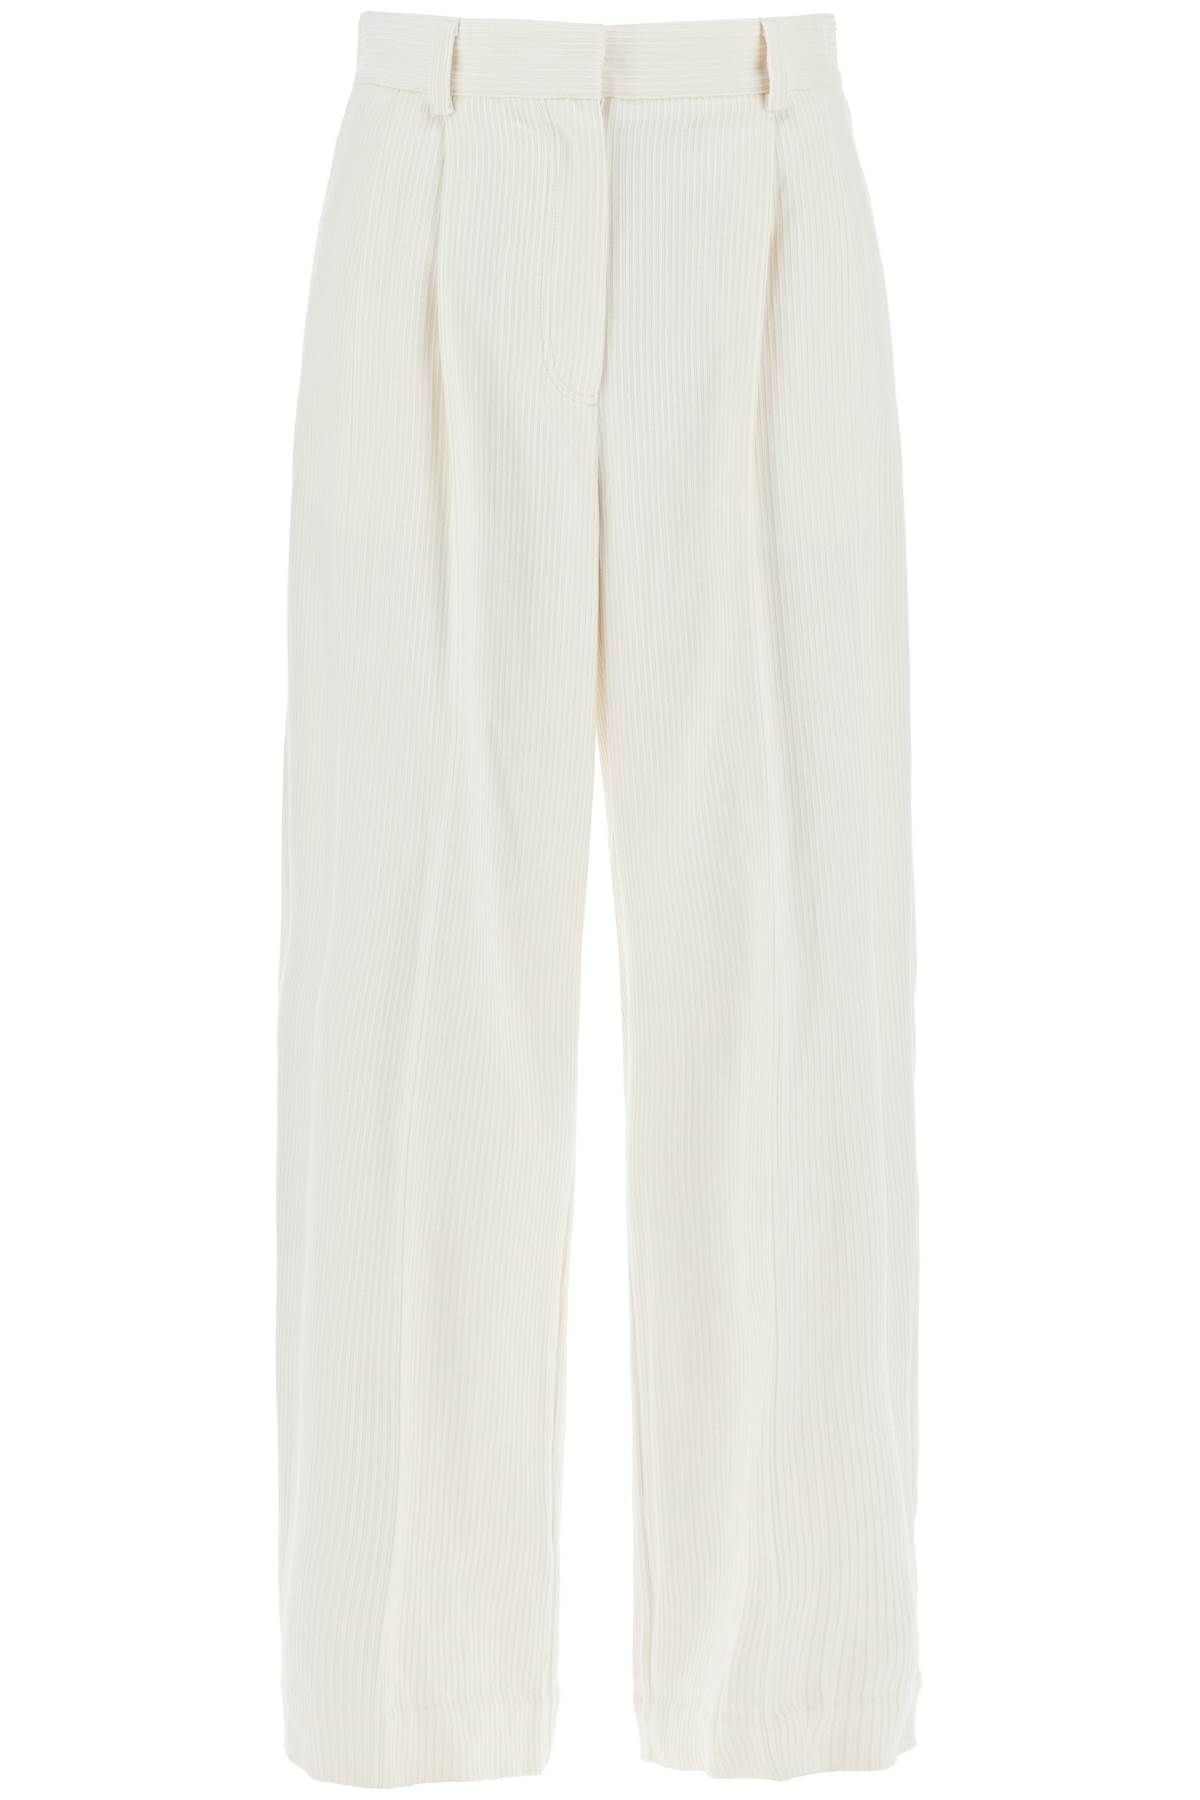 Shop Totême Silk And Cotton Corduroy Pants Made In White